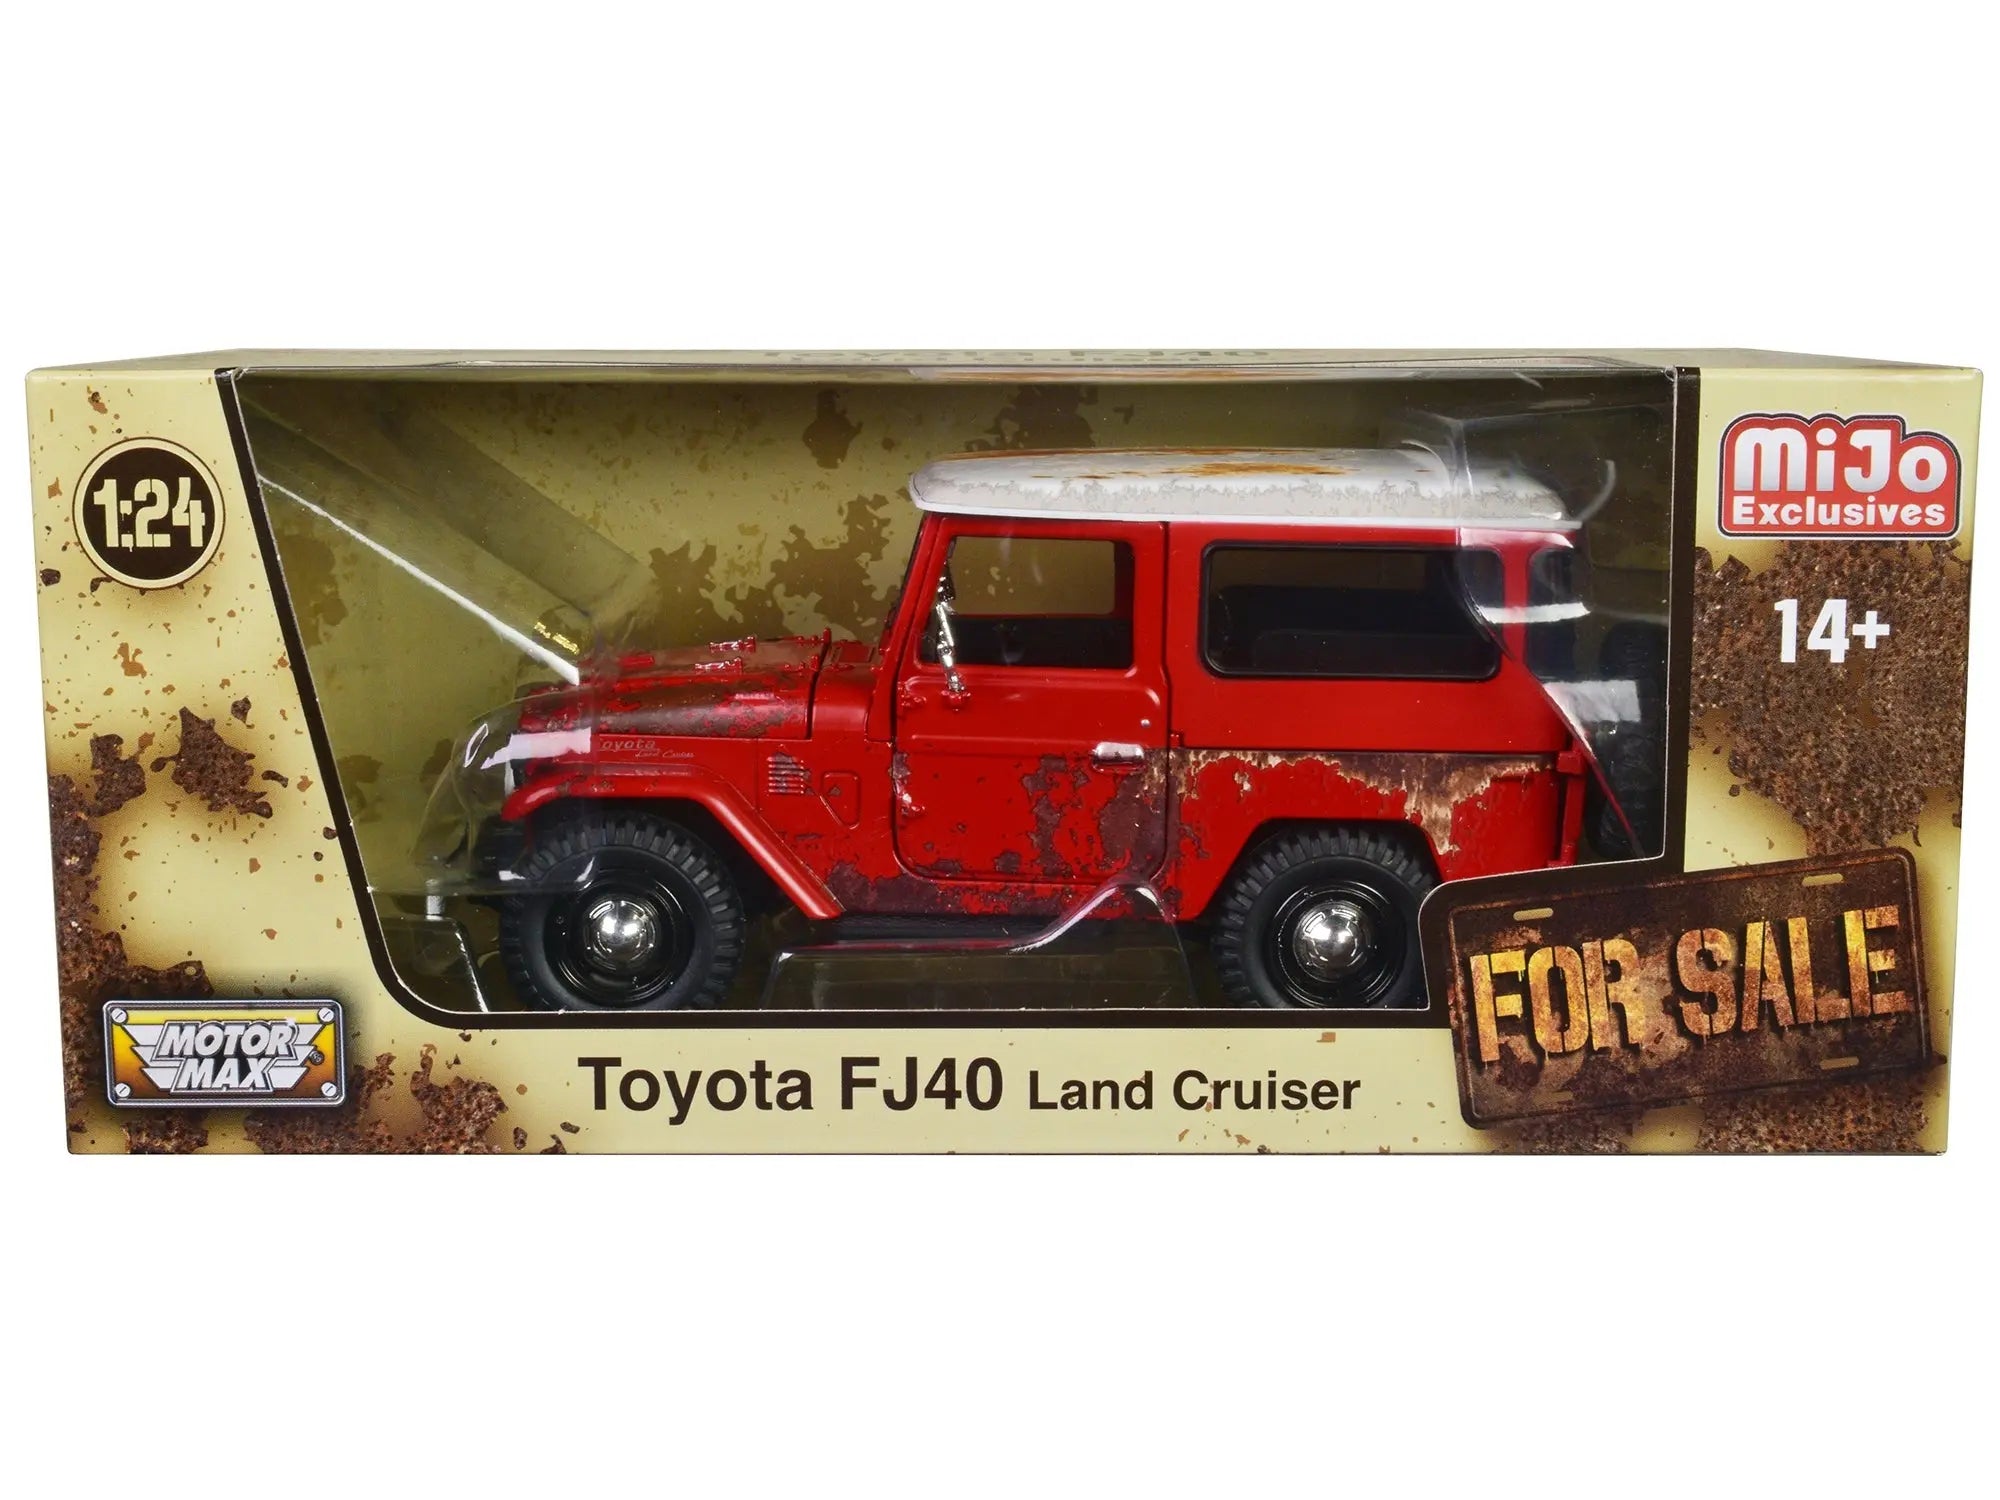 Toyota FJ40 Land Cruiser Red with White Top (Rusted Version) "For Sale" Series 1/24 Diecast Model Car by Motormax Motormax